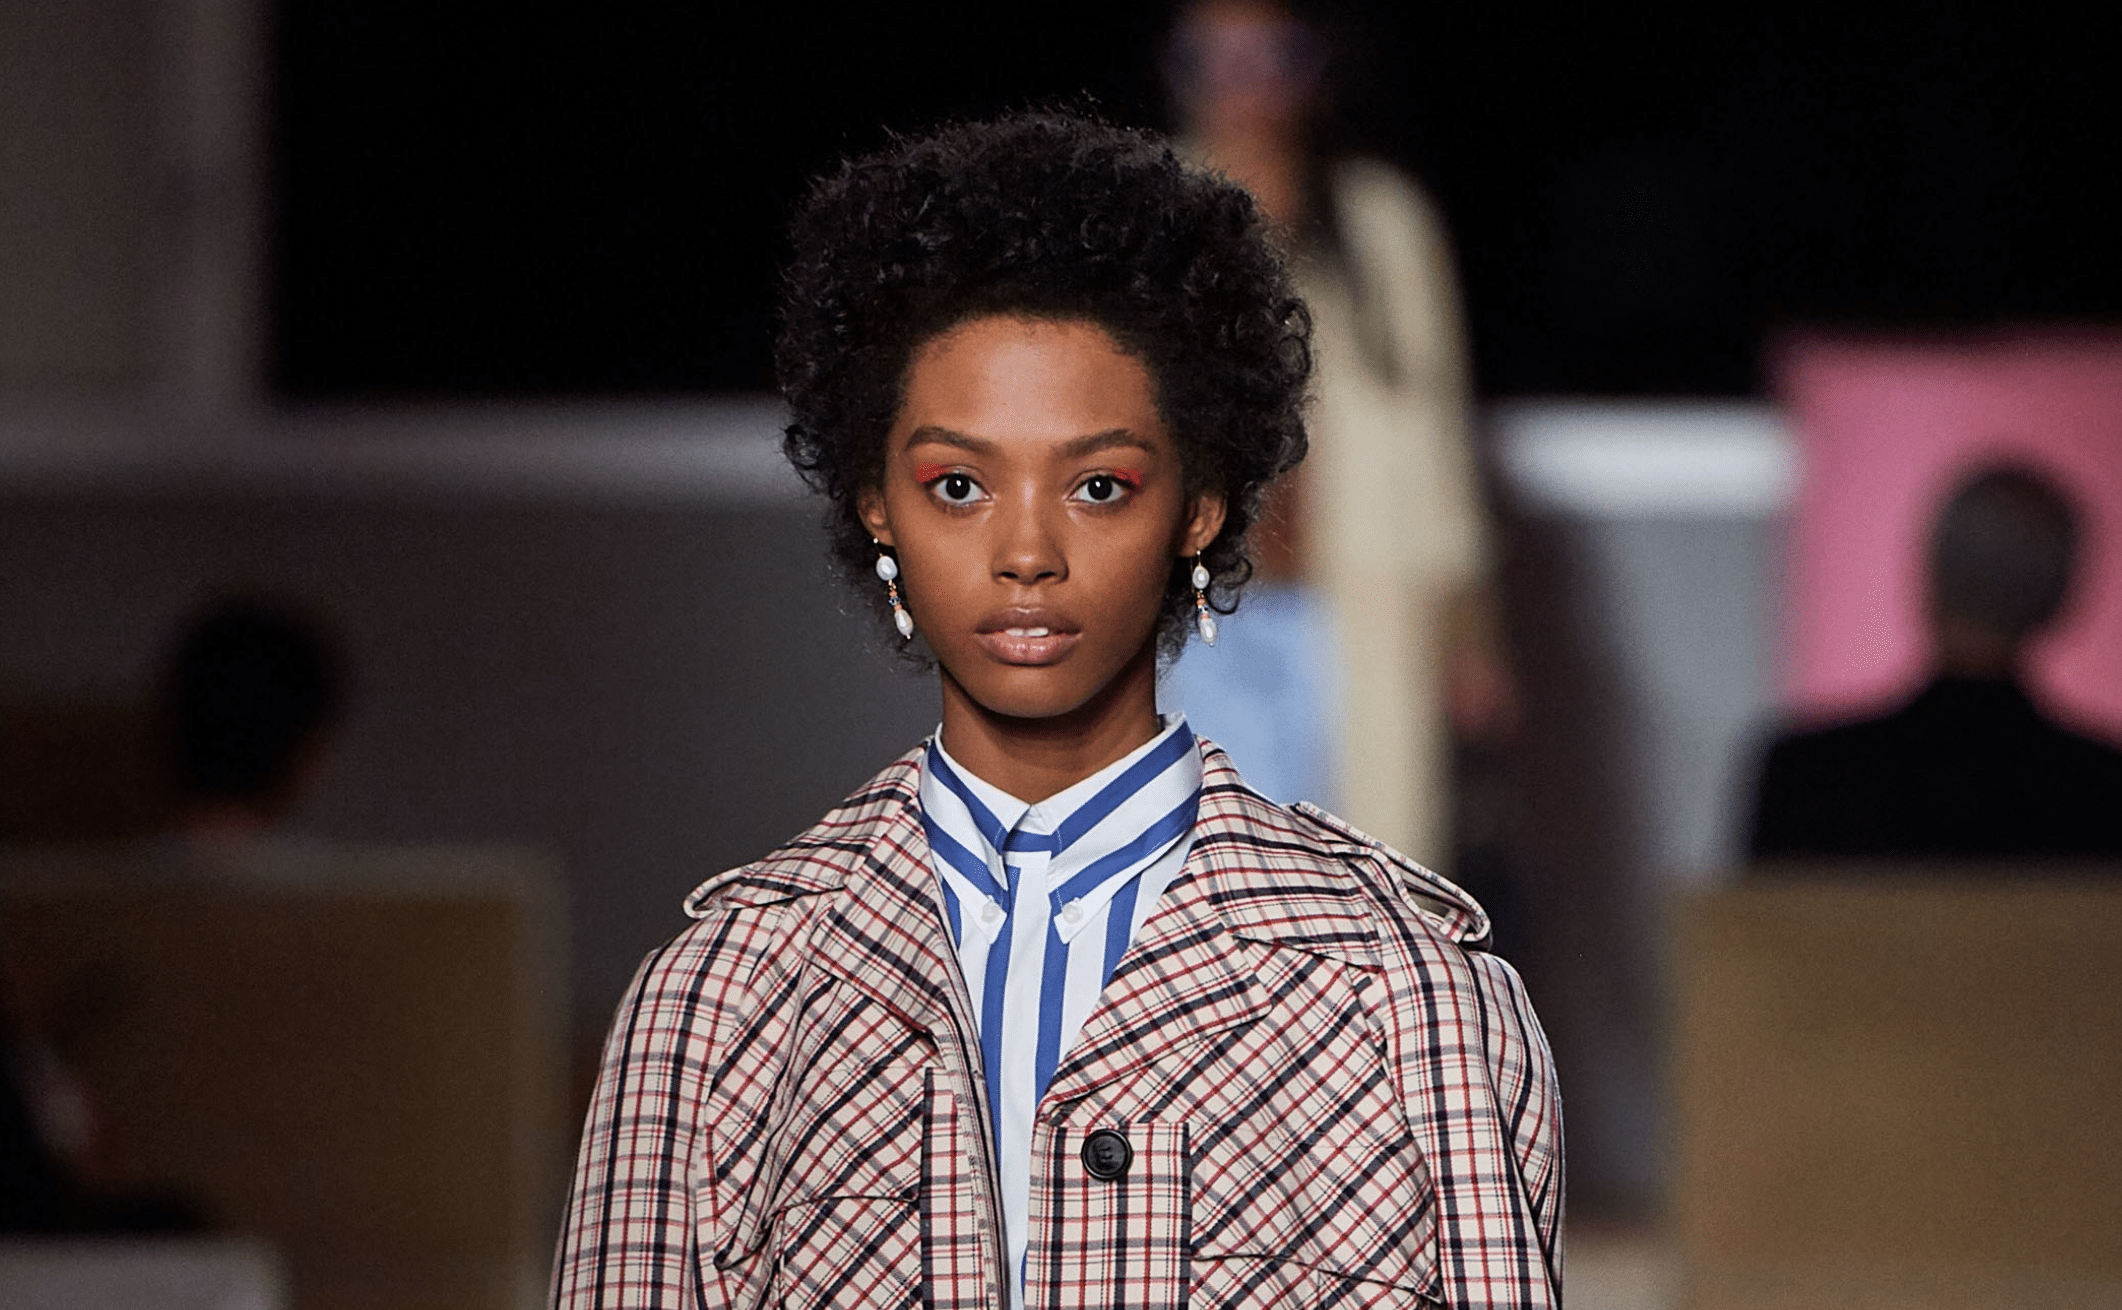 3 Trends From This Week’s Resort Shows To Try Now